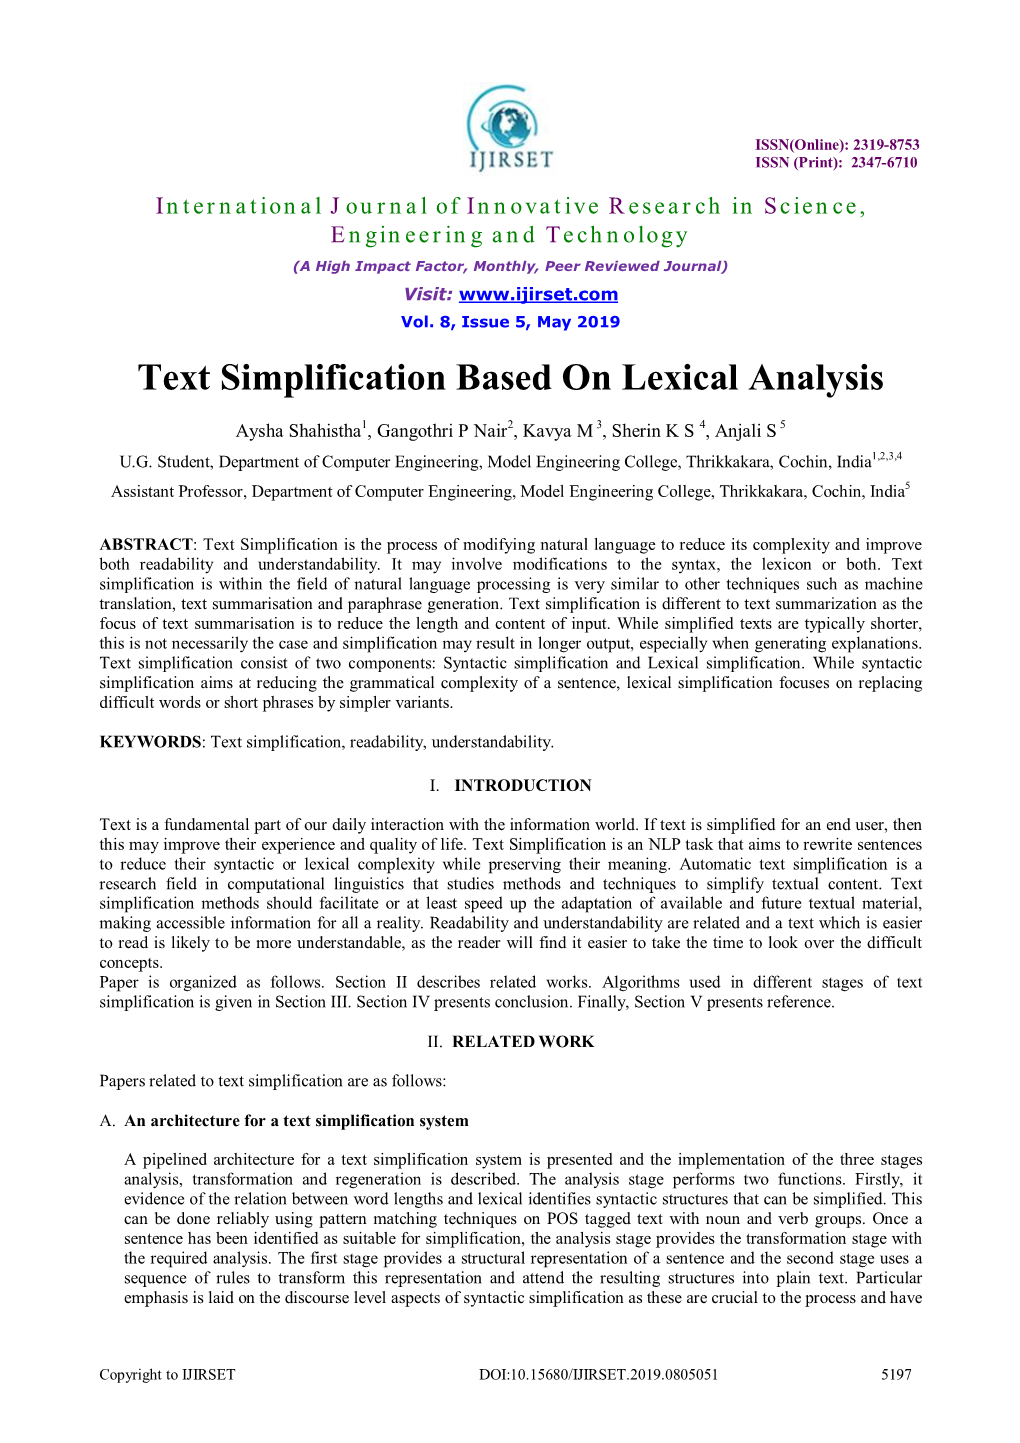 Text Simplification Based on Lexical Analysis